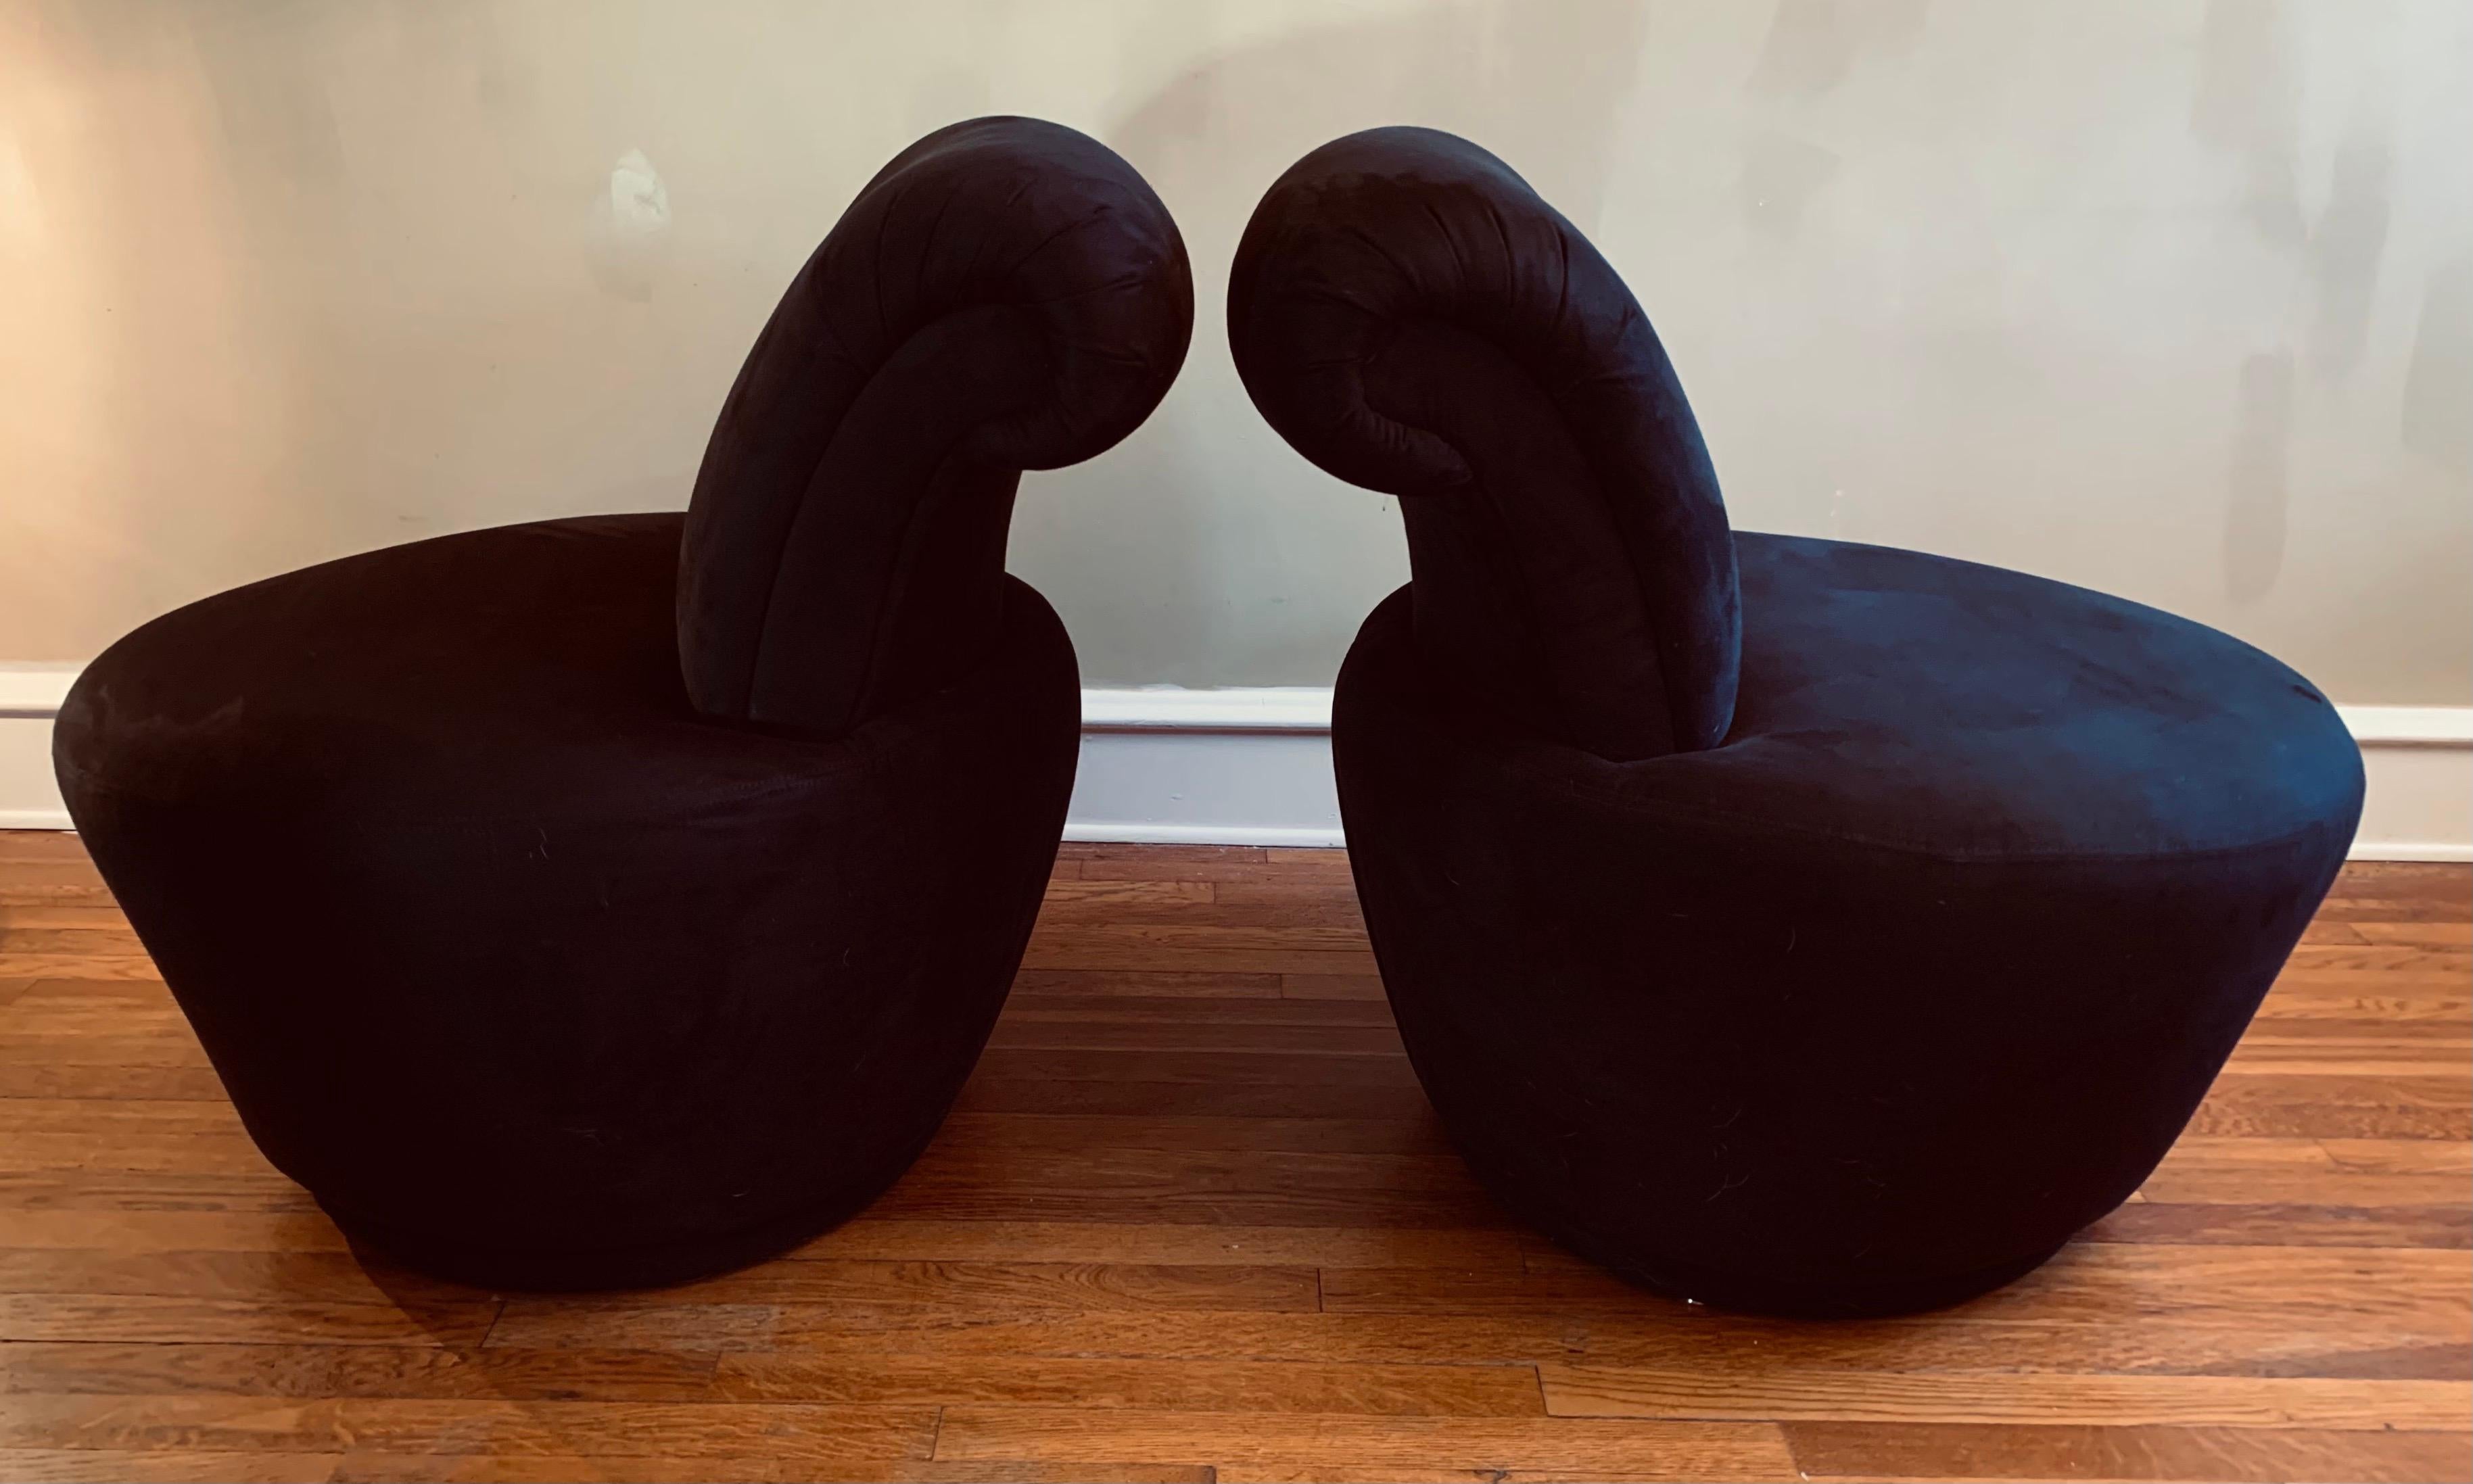 Handsome pair of Vladimir Kagan for Weiman swivel chairs. 

Black ultra suede upholstery is in excellent condition.

Swivels function smoothly and quietly. 

While these chairs are more diminutive than many of Kagan's creations, they still